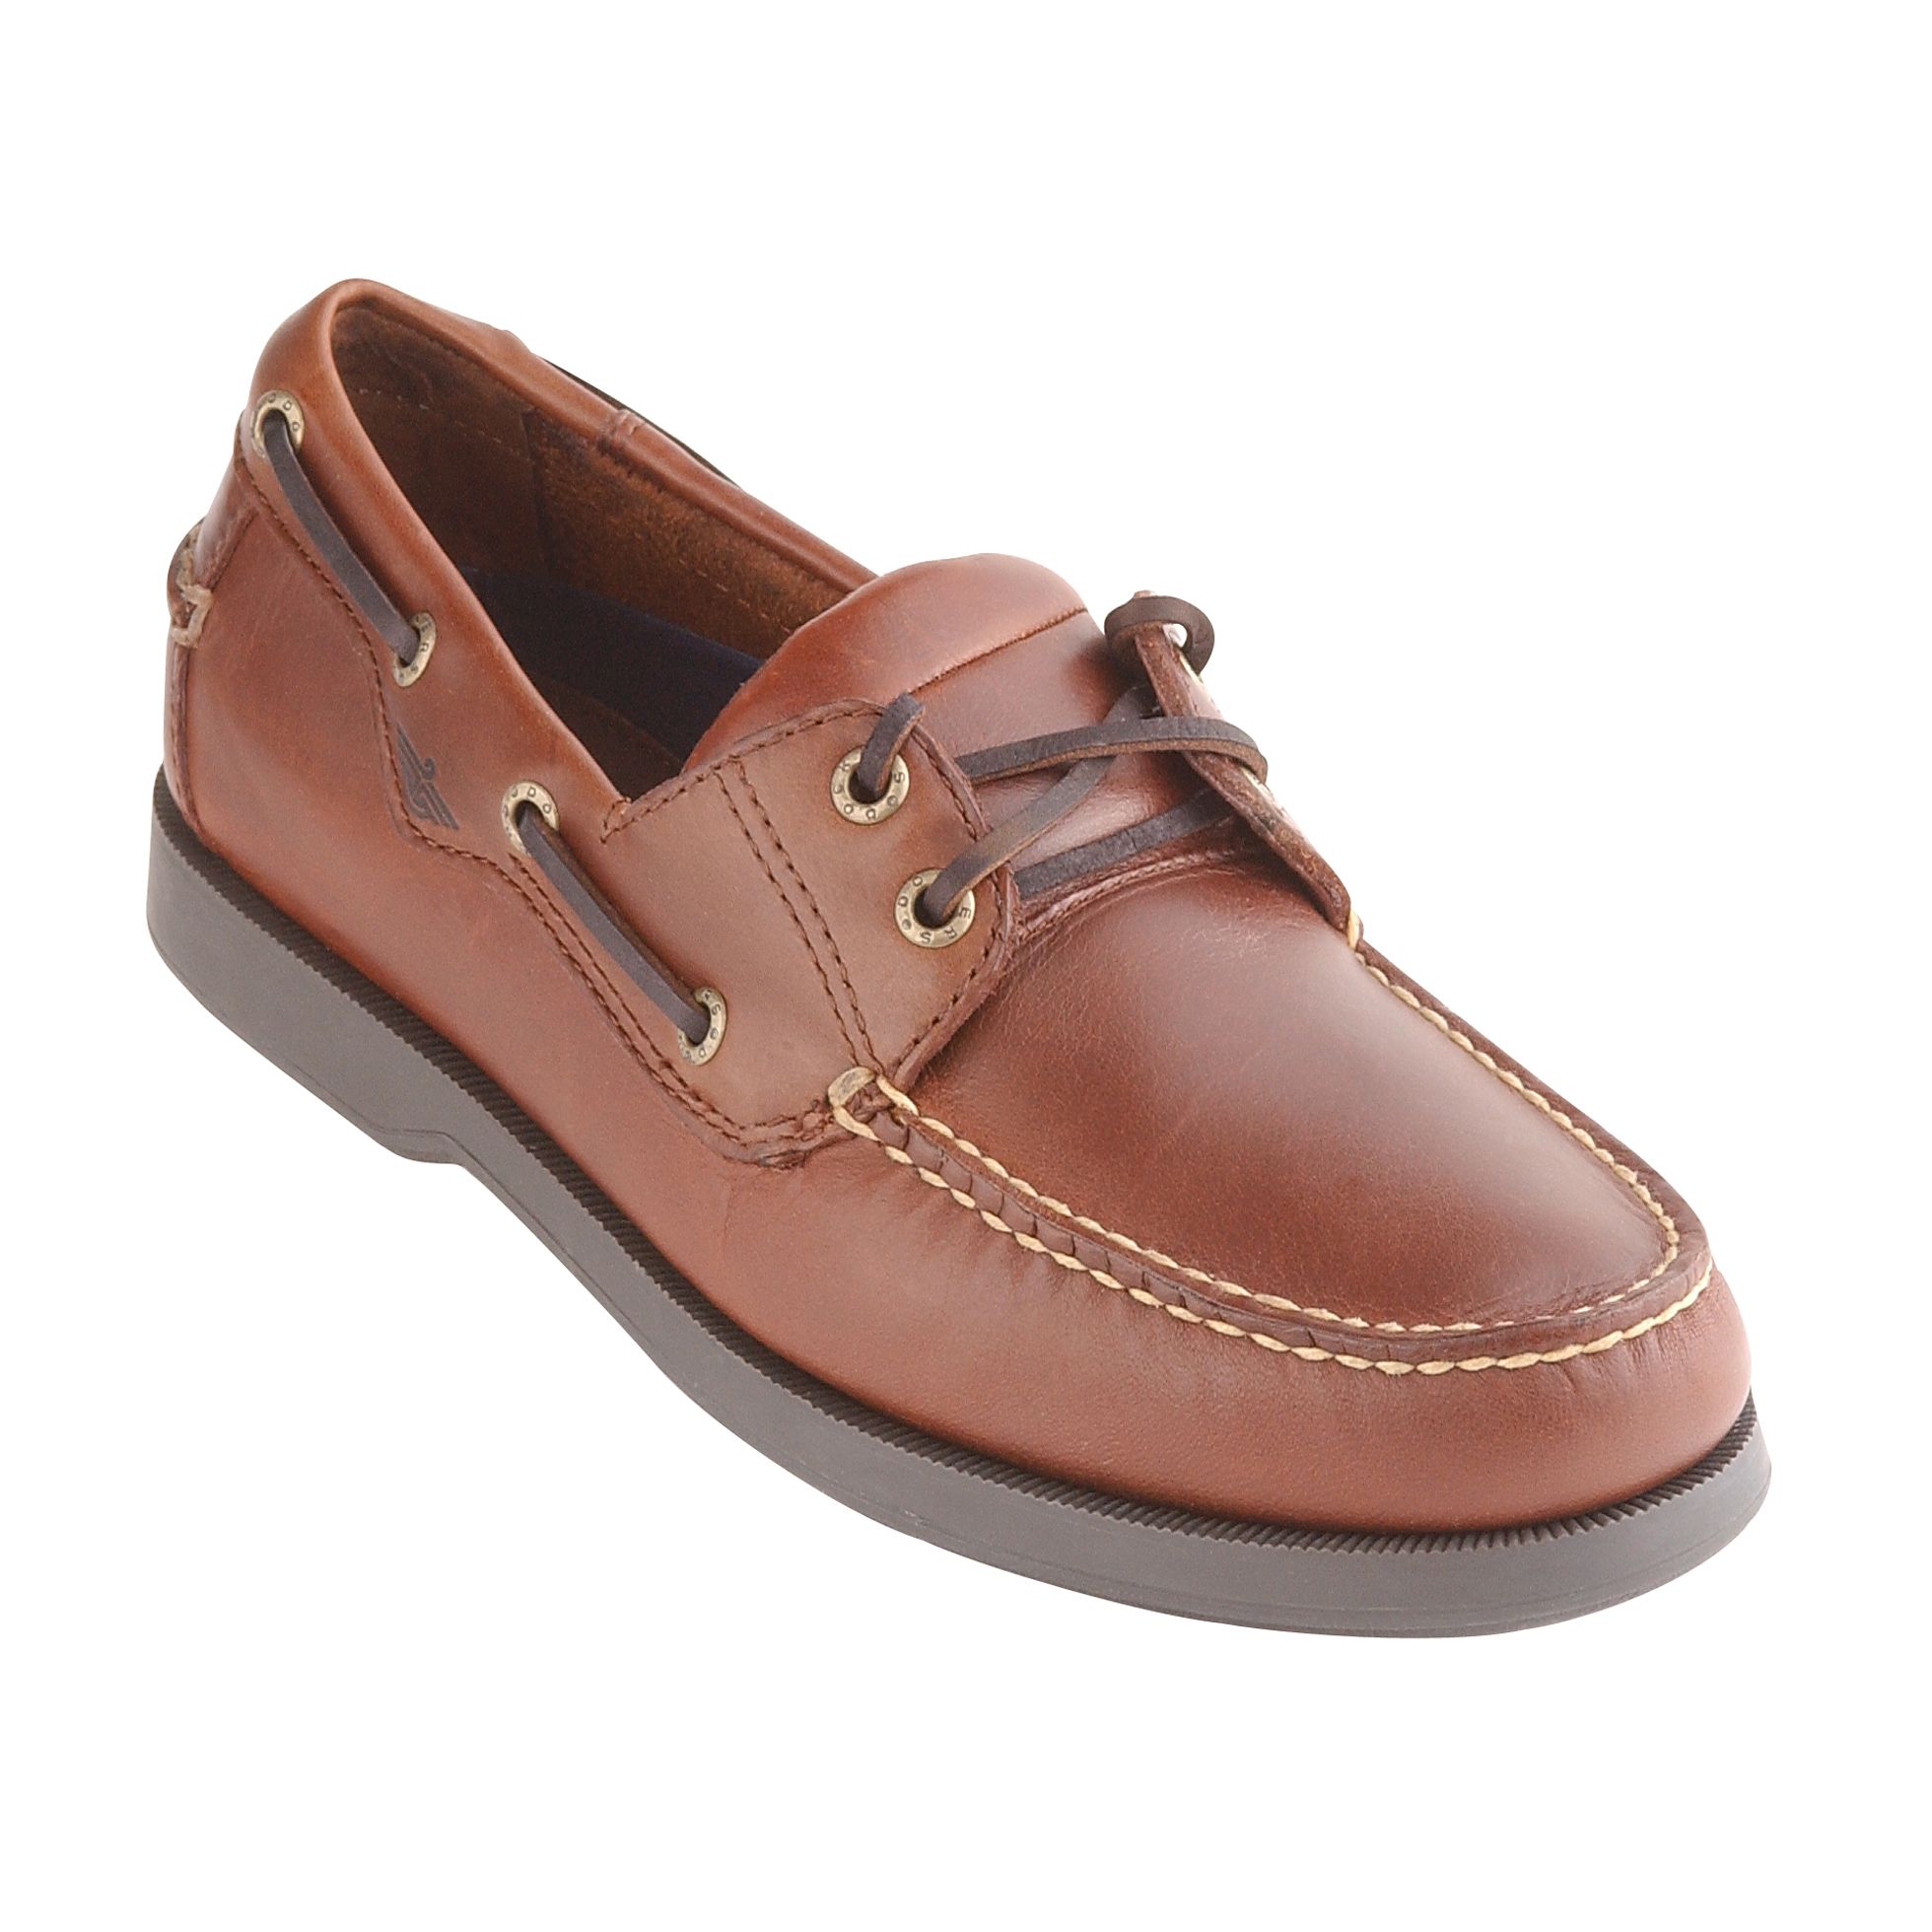 mens casual boat shoes